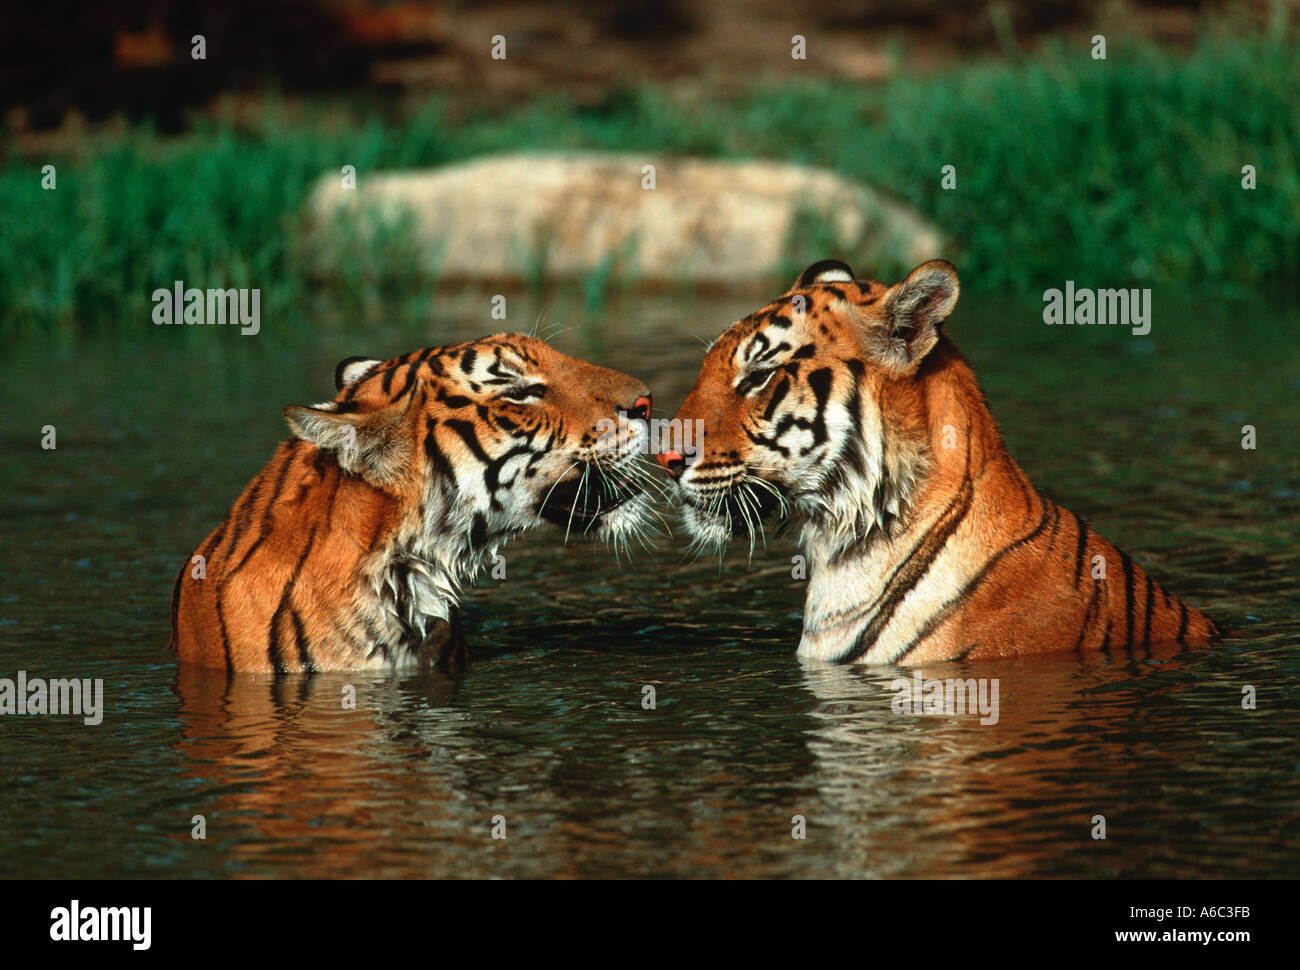 Tiger Panthera tigris Swimming in hot weather Endangered Corbett National Park India Asia extinct in much of its range Stock Photo